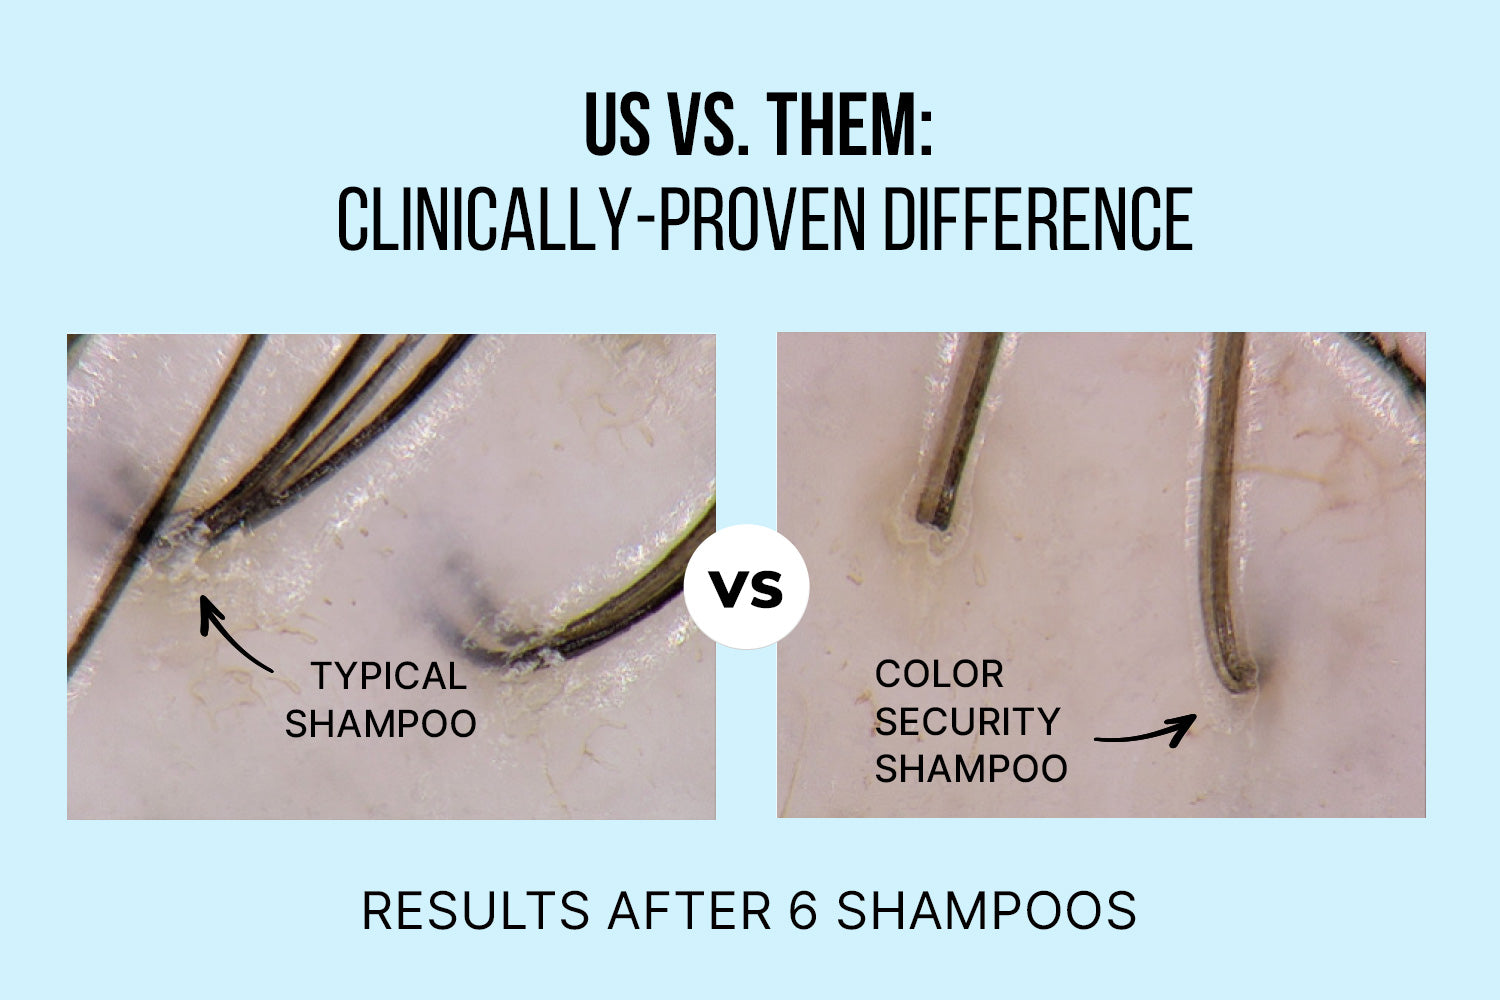 Us vs. The: Clinically Proven Difference. Image of hair with residue from a typical shampoo vs. an image of hair with no residue from using Color Security Shampoo. Results after 6 shampoos. 